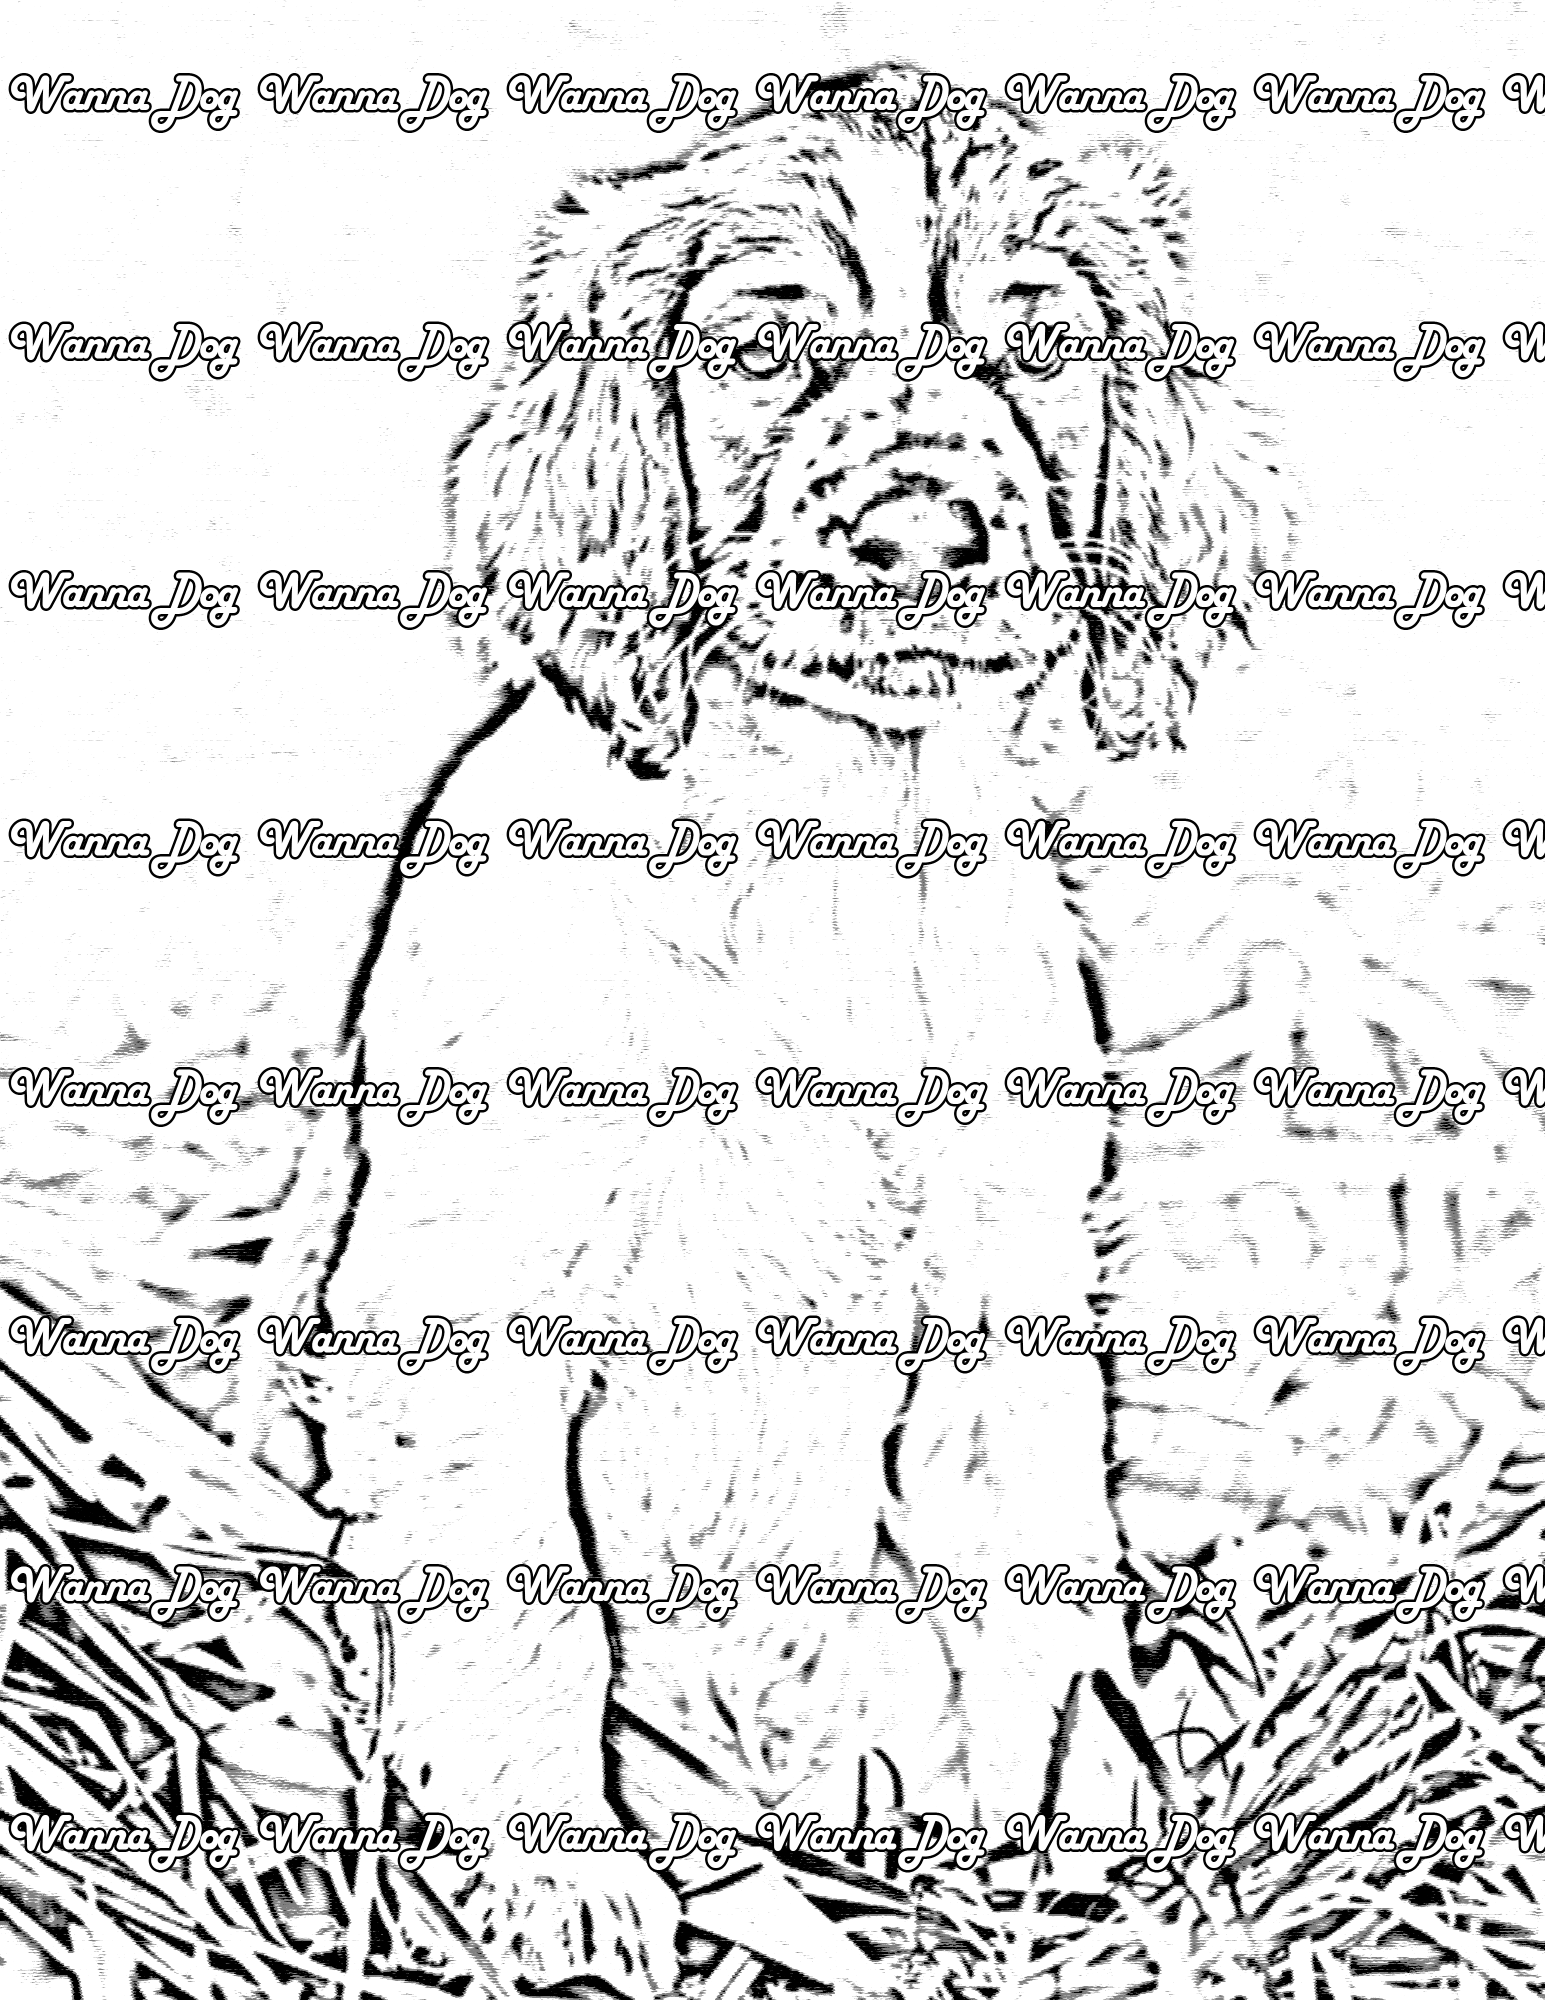 English Springer Spaniel Coloring Page of a English Springer Spaniel puppy sitting in grass